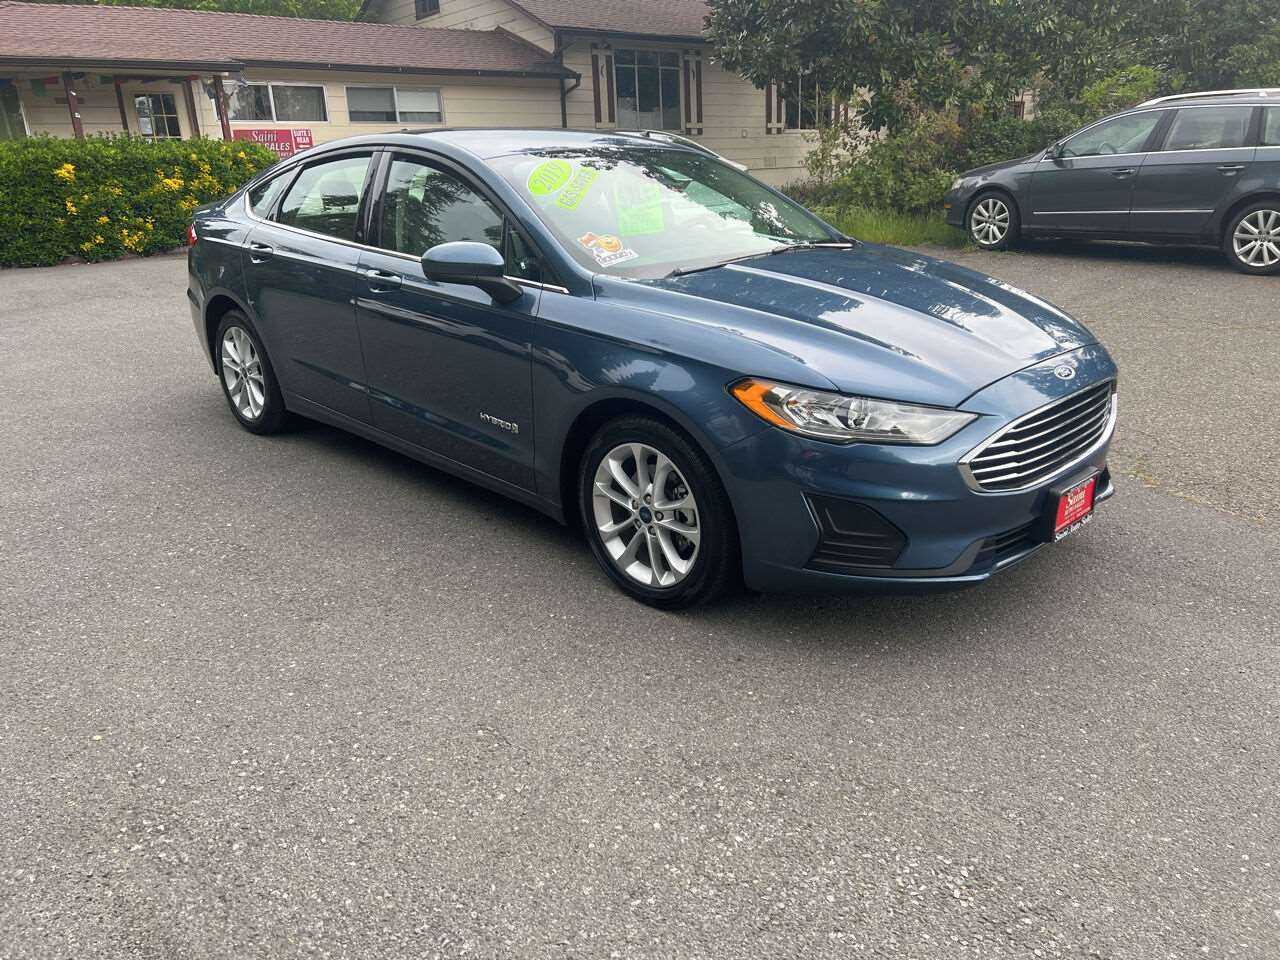 Ford Fusion Hybrid Image 2